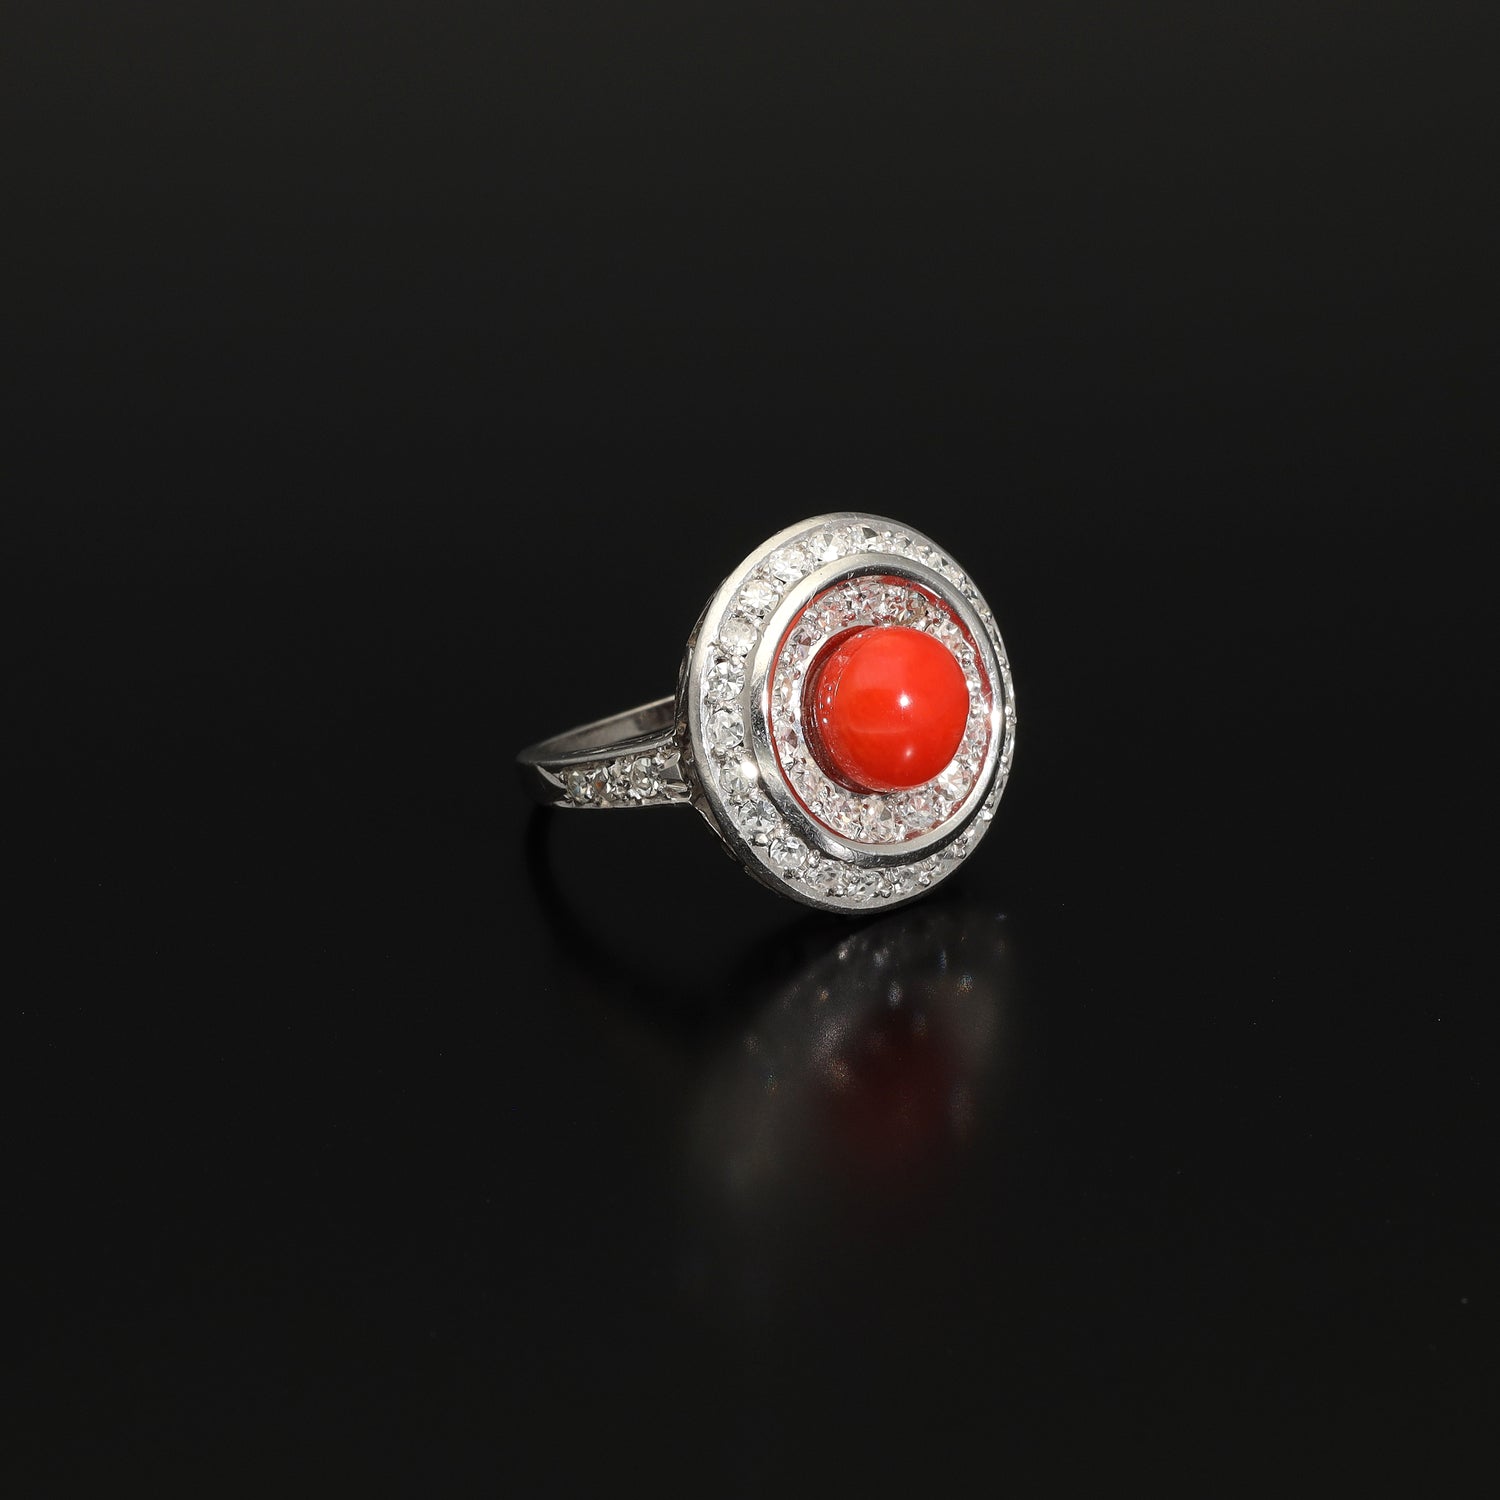 Absolutely STUNNING Art Deco coral and diamond ring. Born in the South of Italy, this magnificent ring is crafted in solid 18 kt white gold! The ring is heavy - it weights whooping 8 grams - and is preserved in a superb state. The round crown is set with a lovely Sicilian coral surrounded by a double halo of 40 sparkling diamonds.